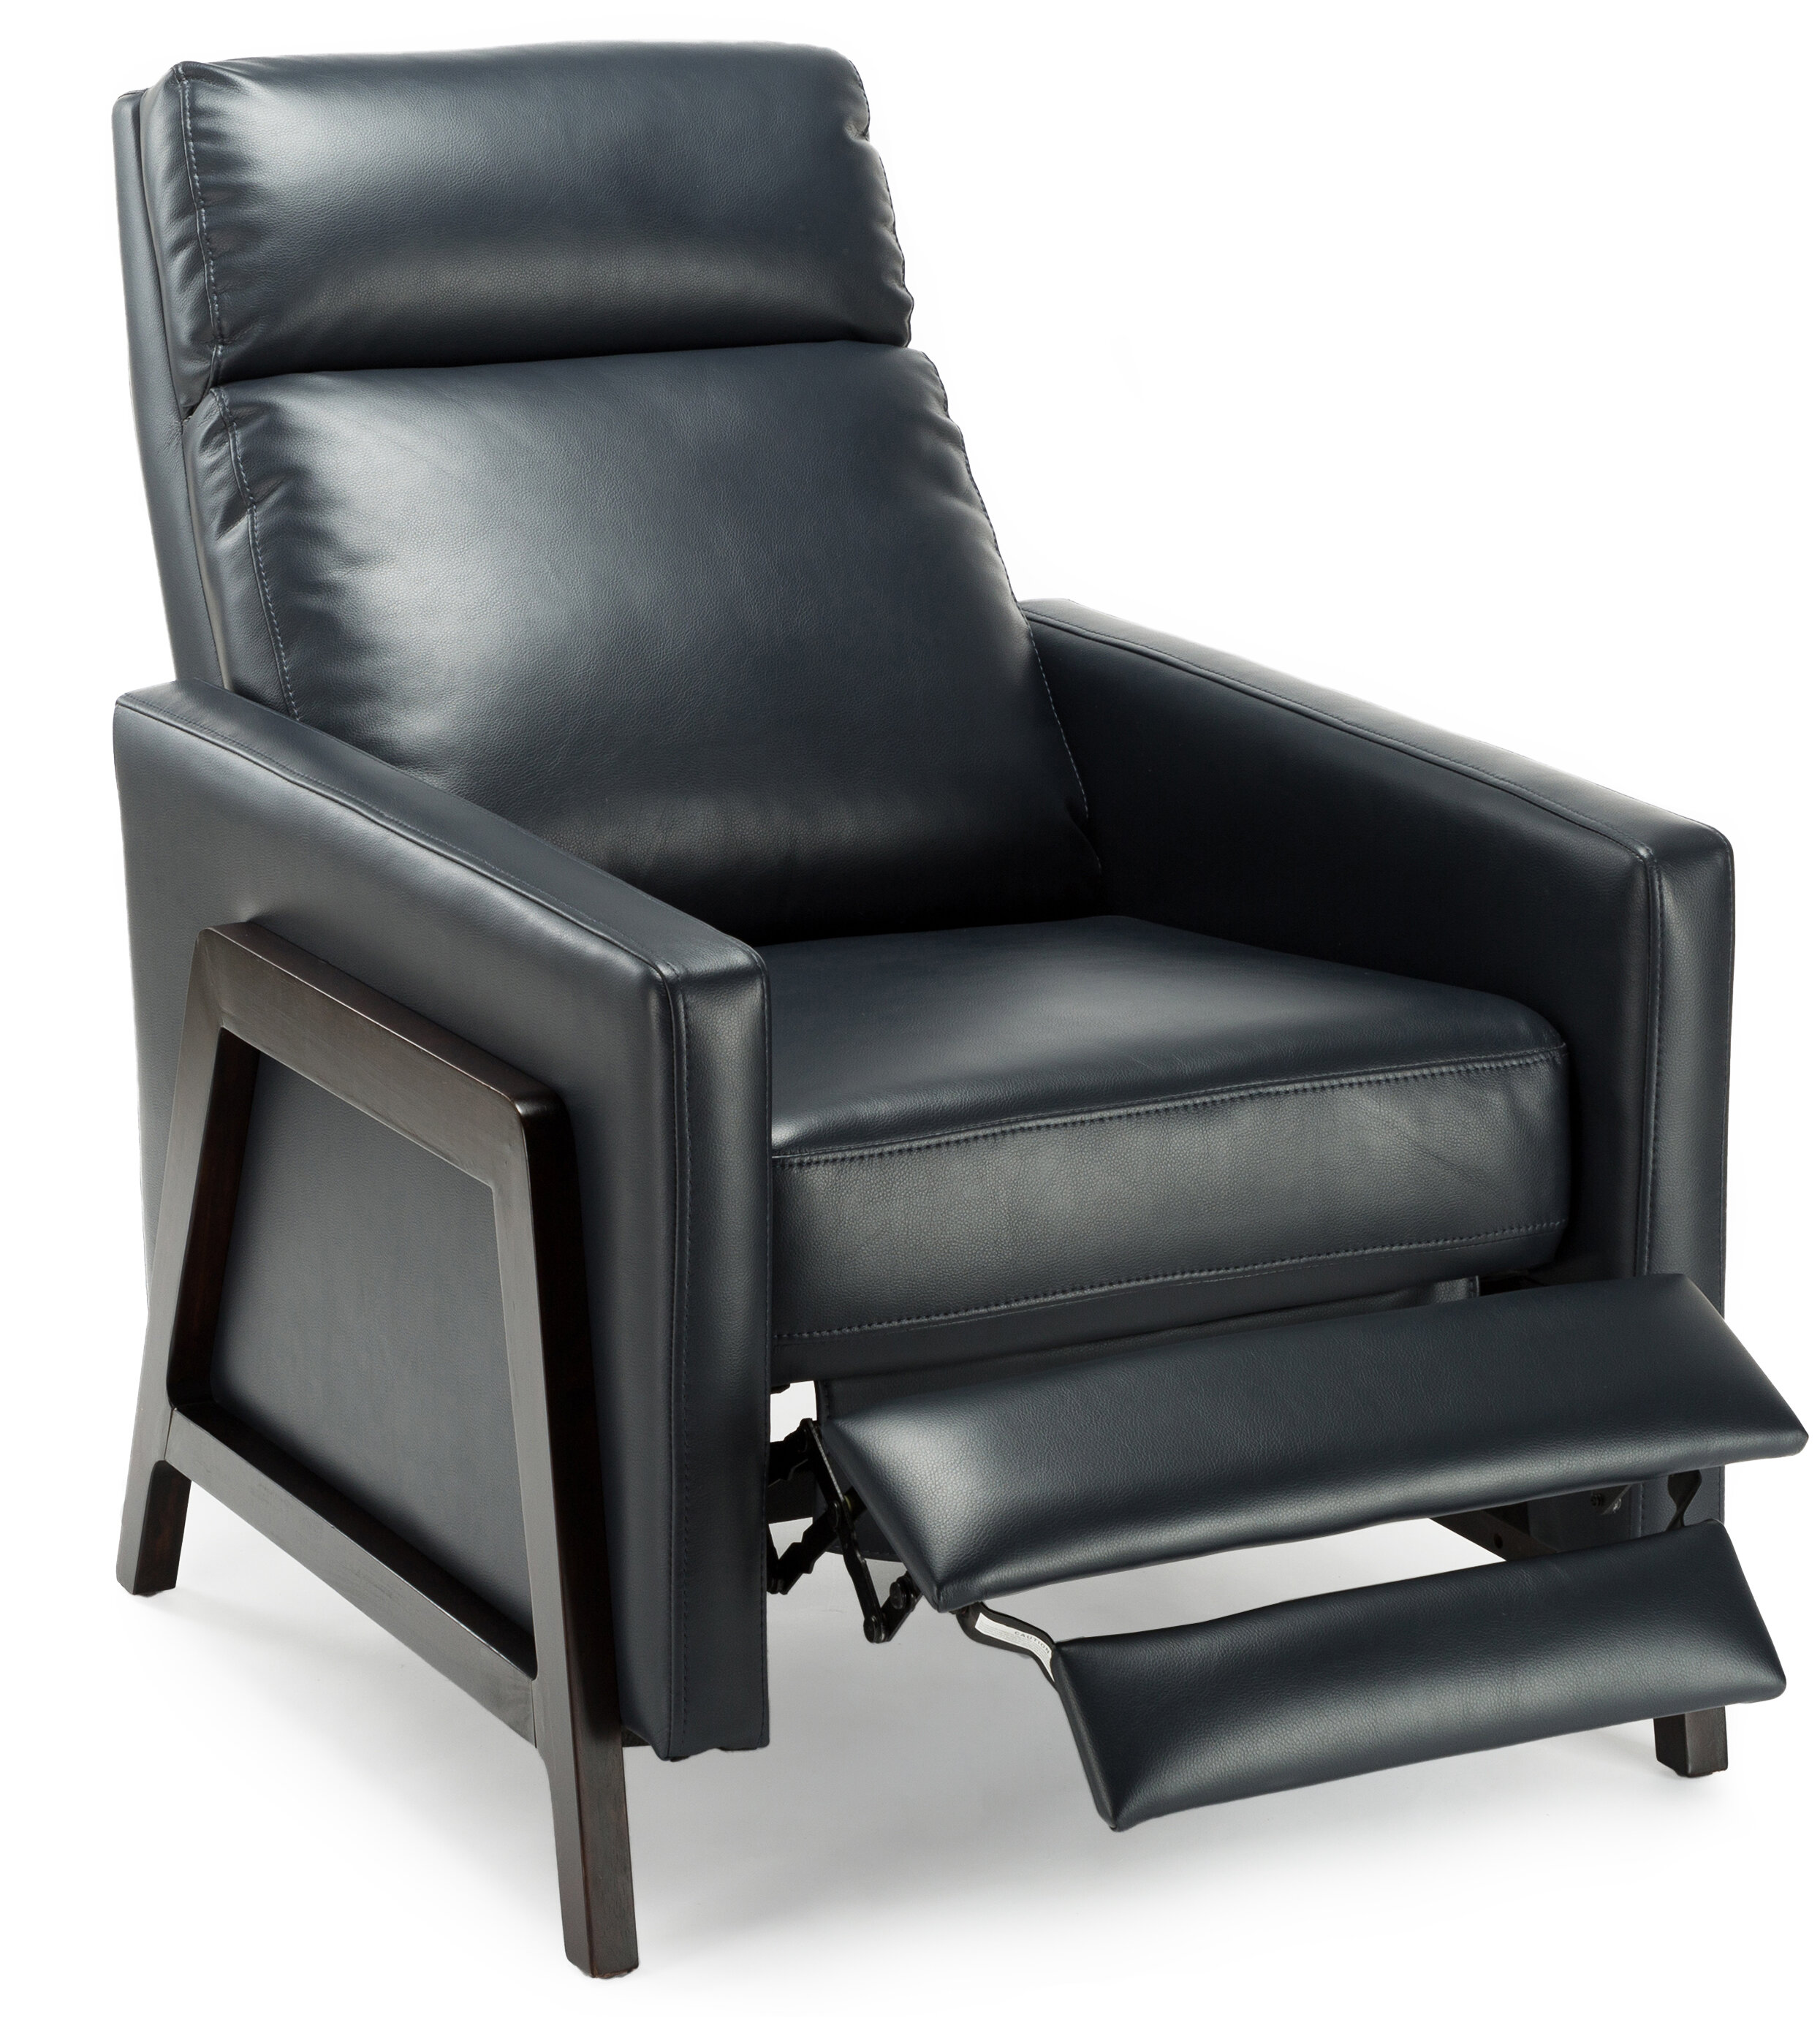 Maxille 30.5” Wide Faux Leather Manual Standard Recliner